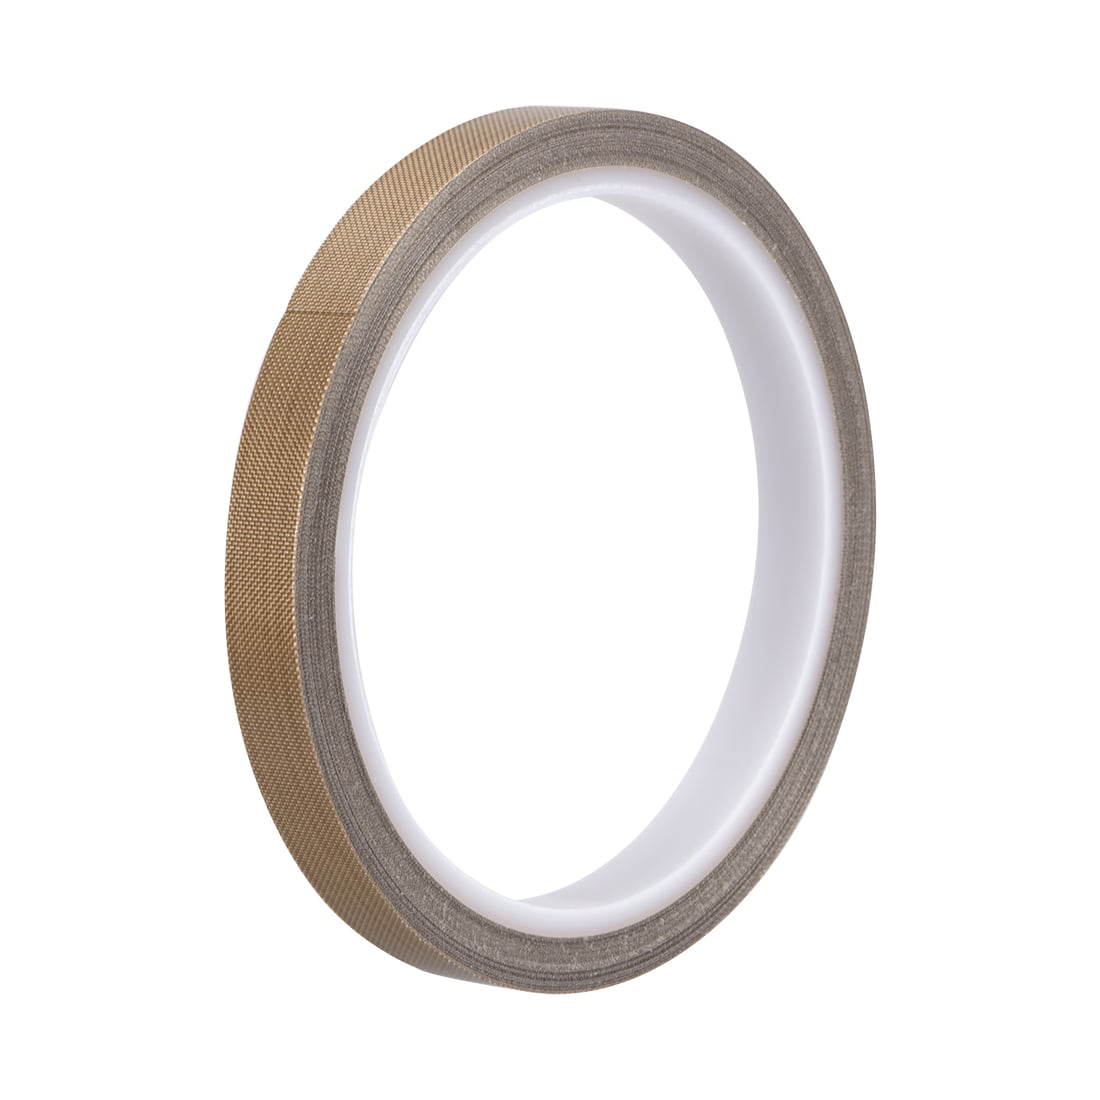 Buy GTI PTFE 12 x 72 mm White Masking Tape online at best rates in India